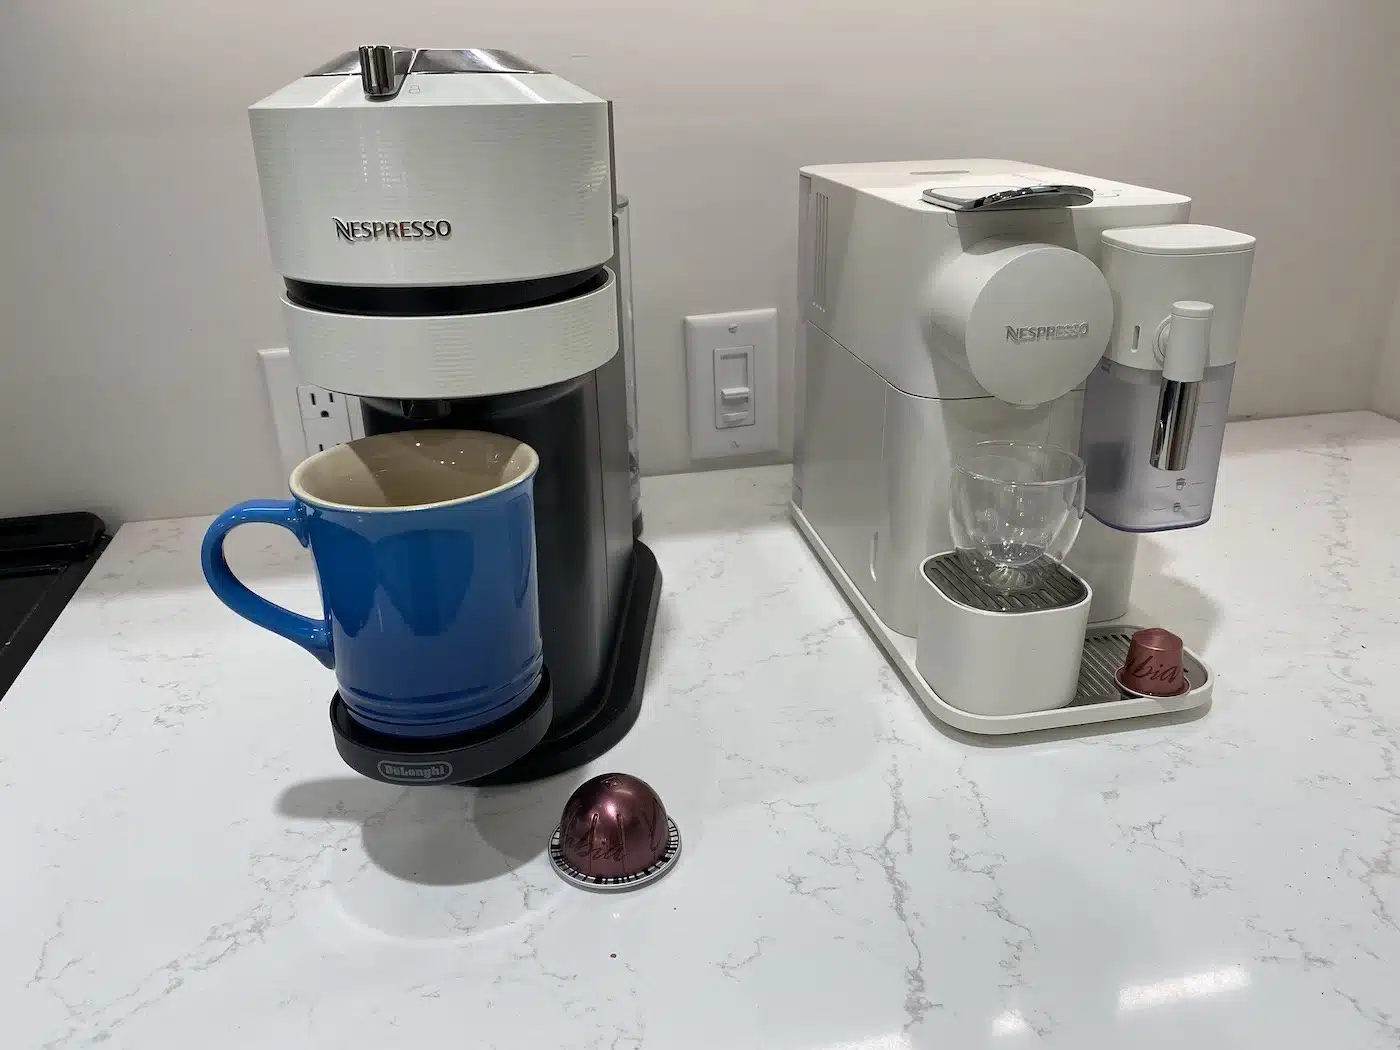 Whats the difference between Nespresso original and Vertuo